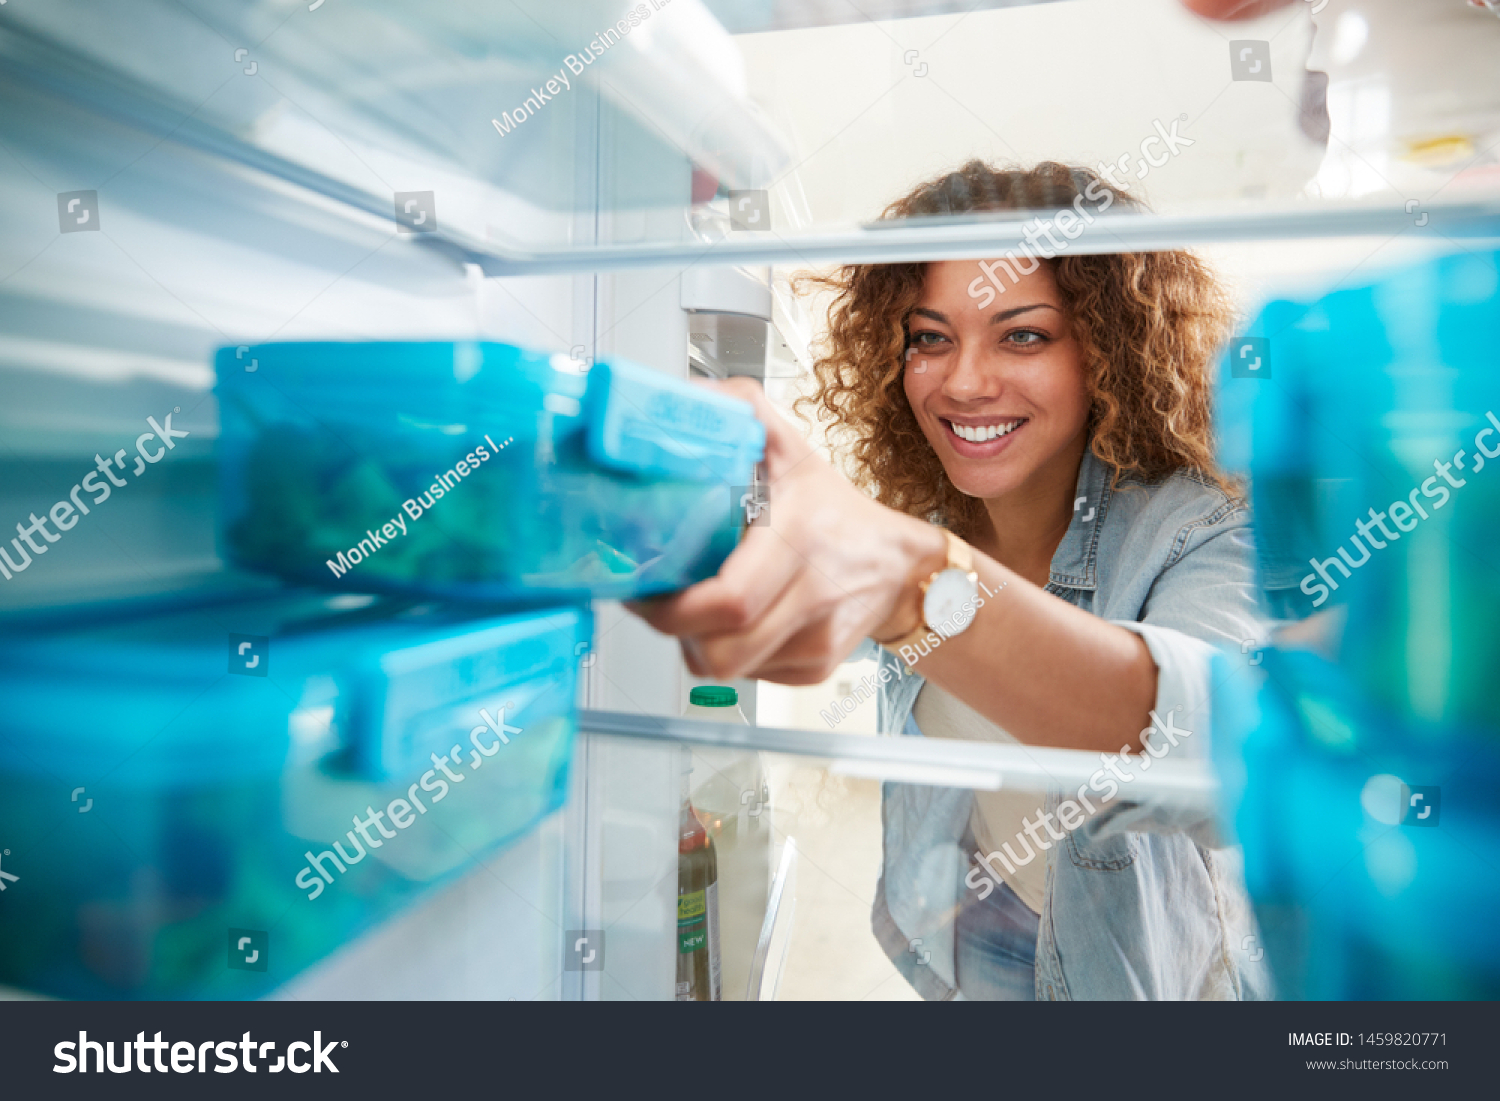 View Looking Out From Inside Of Refrigerator As Woman Takes Out Healthy Packed Lunch In Container #1459820771